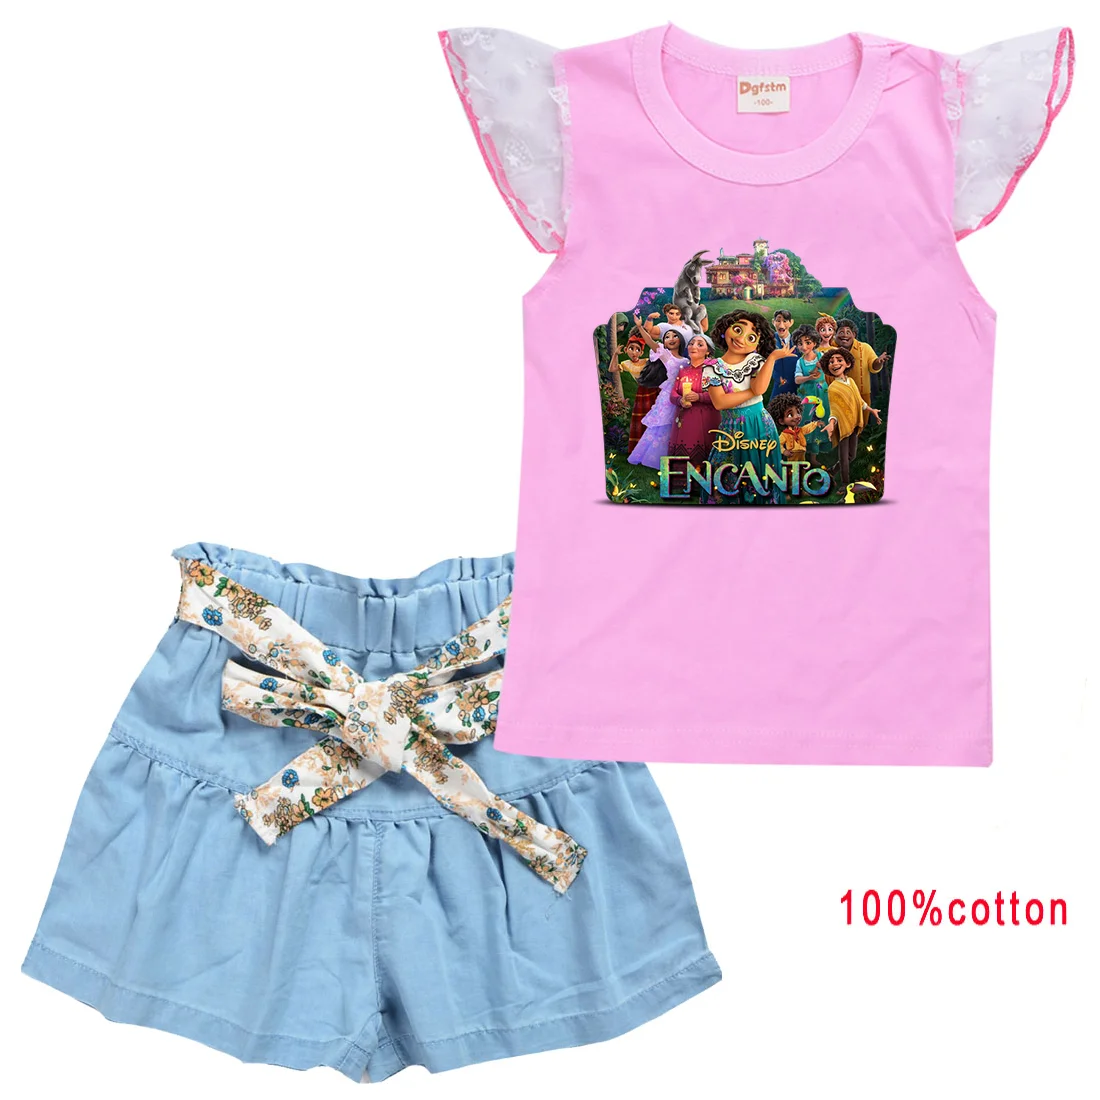 

2pc/Sets Disney Encanto Girls Clothing Outfits Summer T-shirt Shorts Clothes Casual Sports Tracksuits